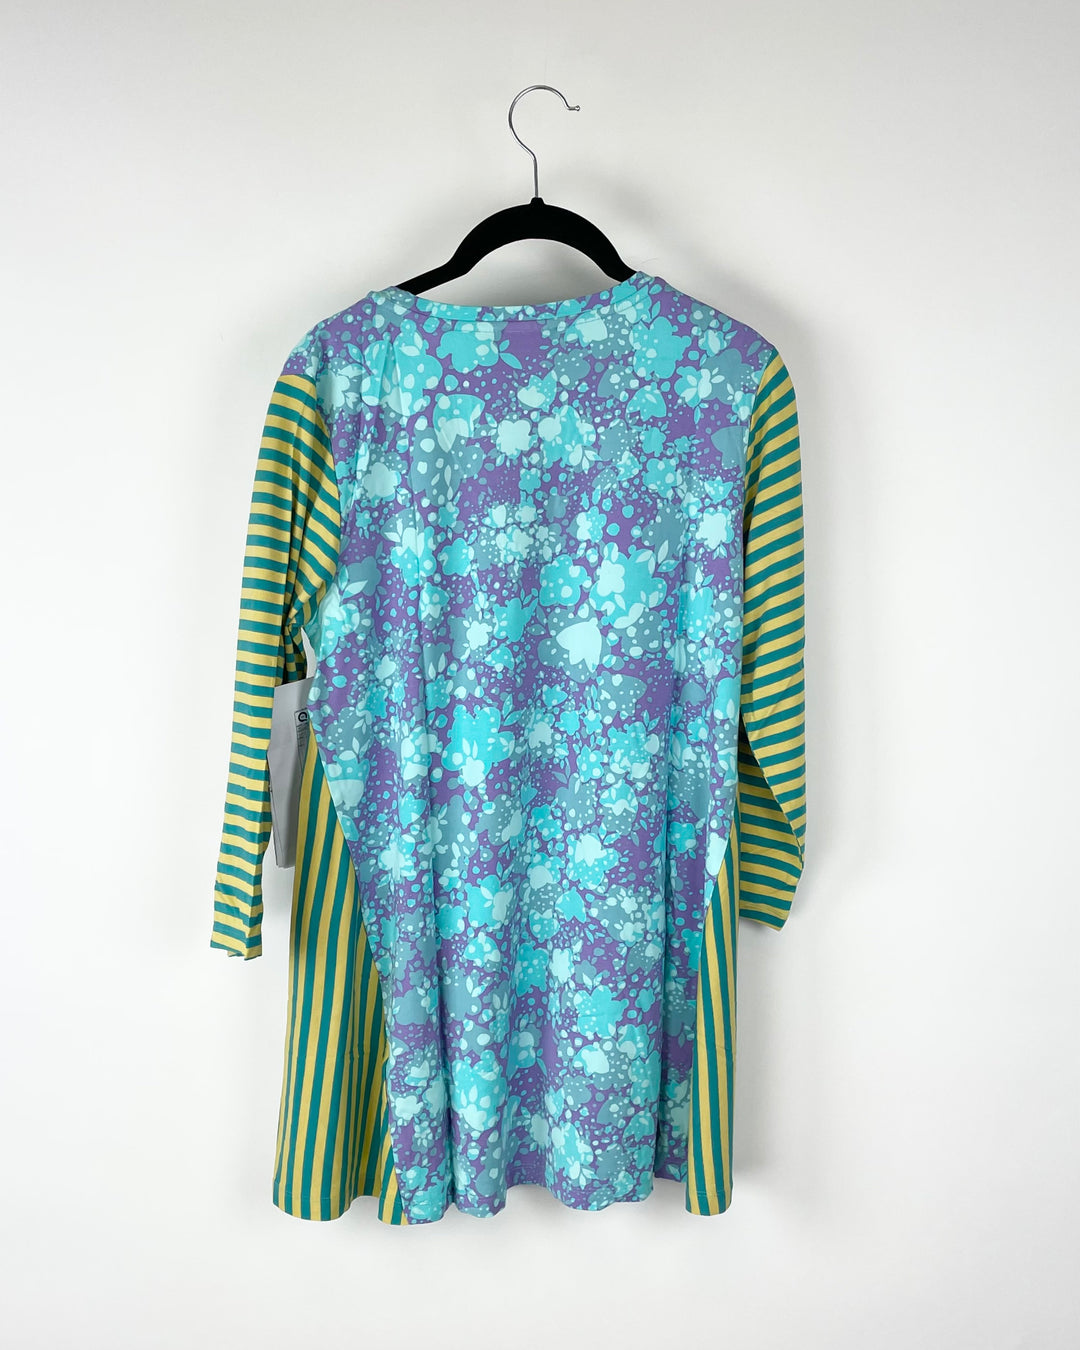 Blue Floral Top With Striped Sleeves - Small